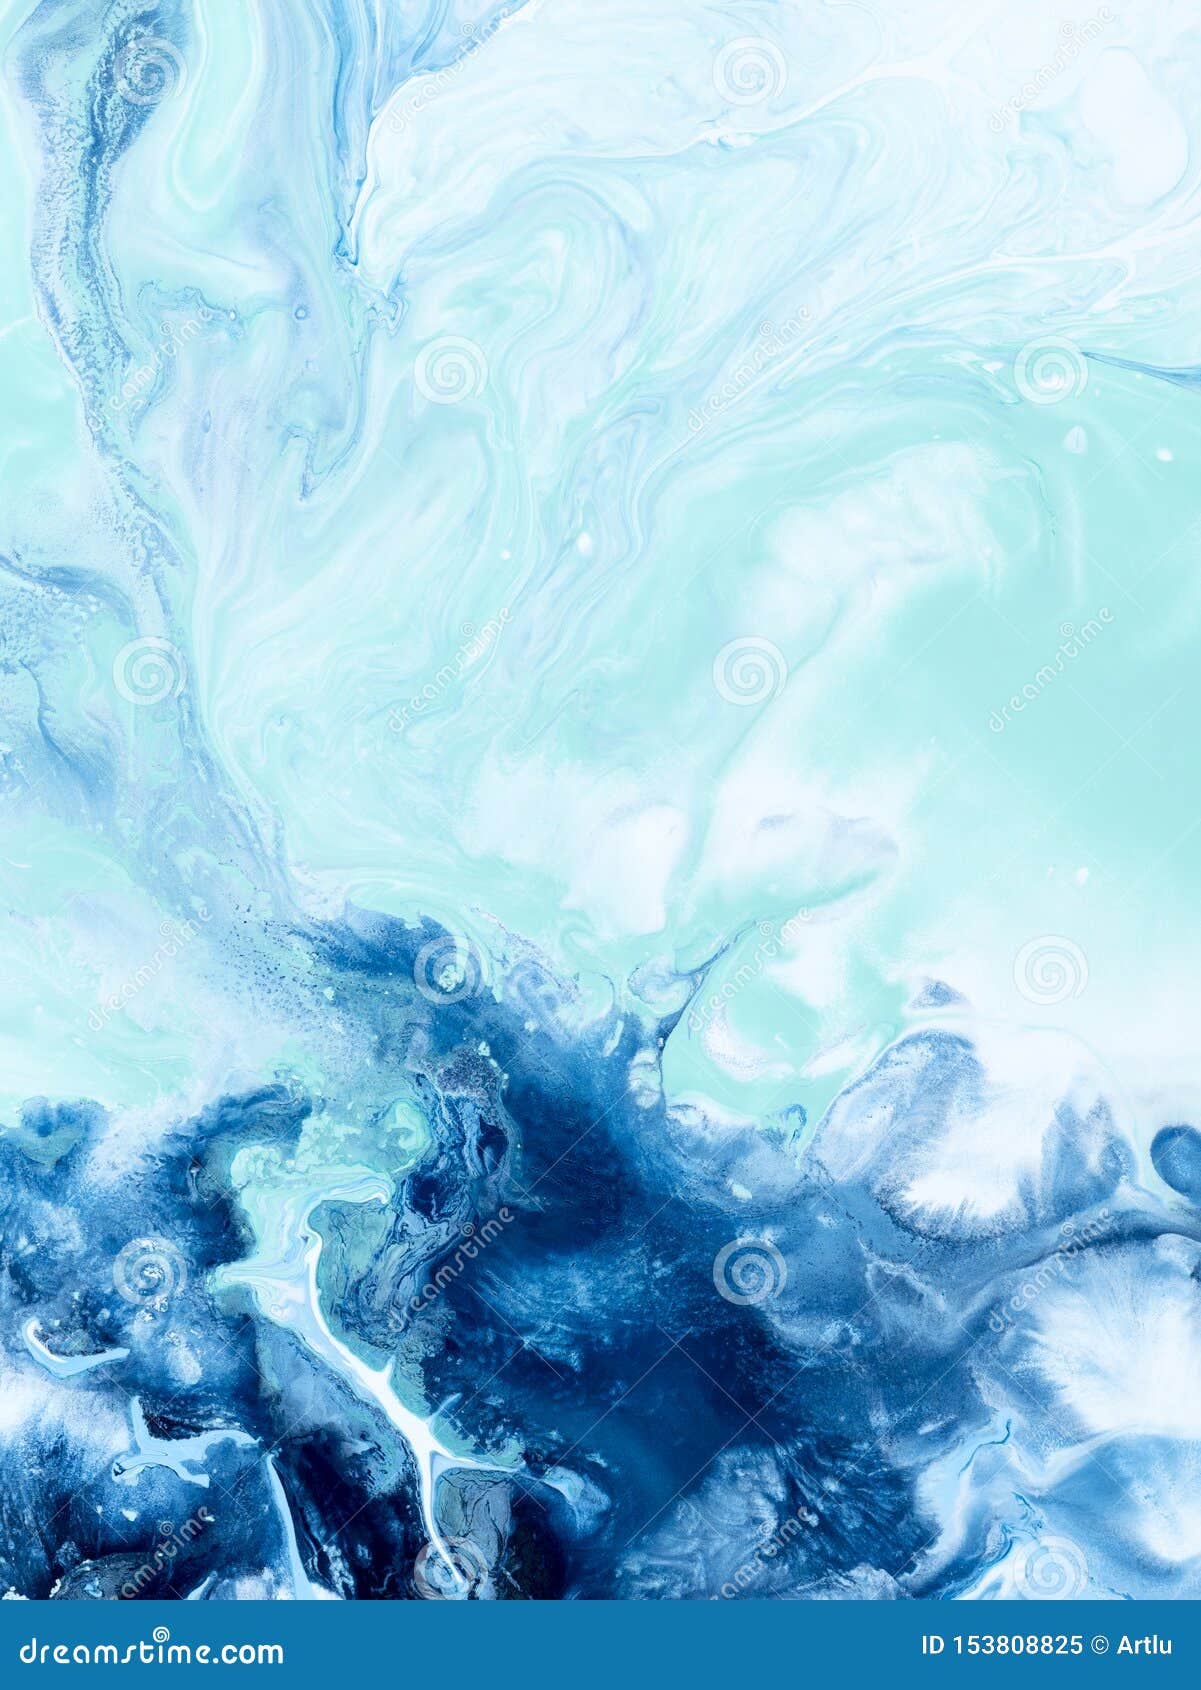 Blue And Green Creative Abstract Hand Painted Background, Marble Texture, Abstract Ocean Stock